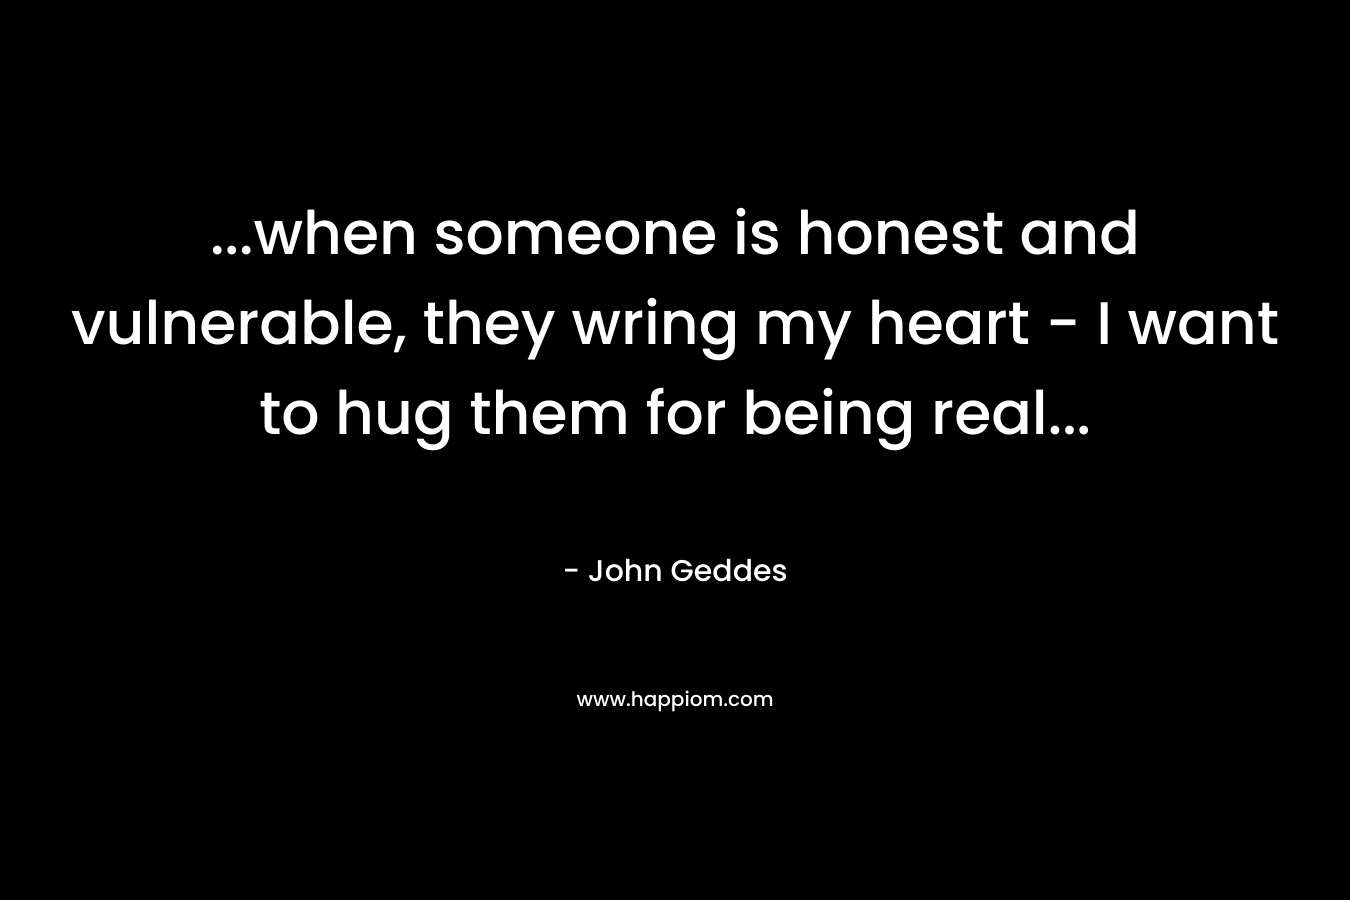 ...when someone is honest and vulnerable, they wring my heart - I want to hug them for being real...